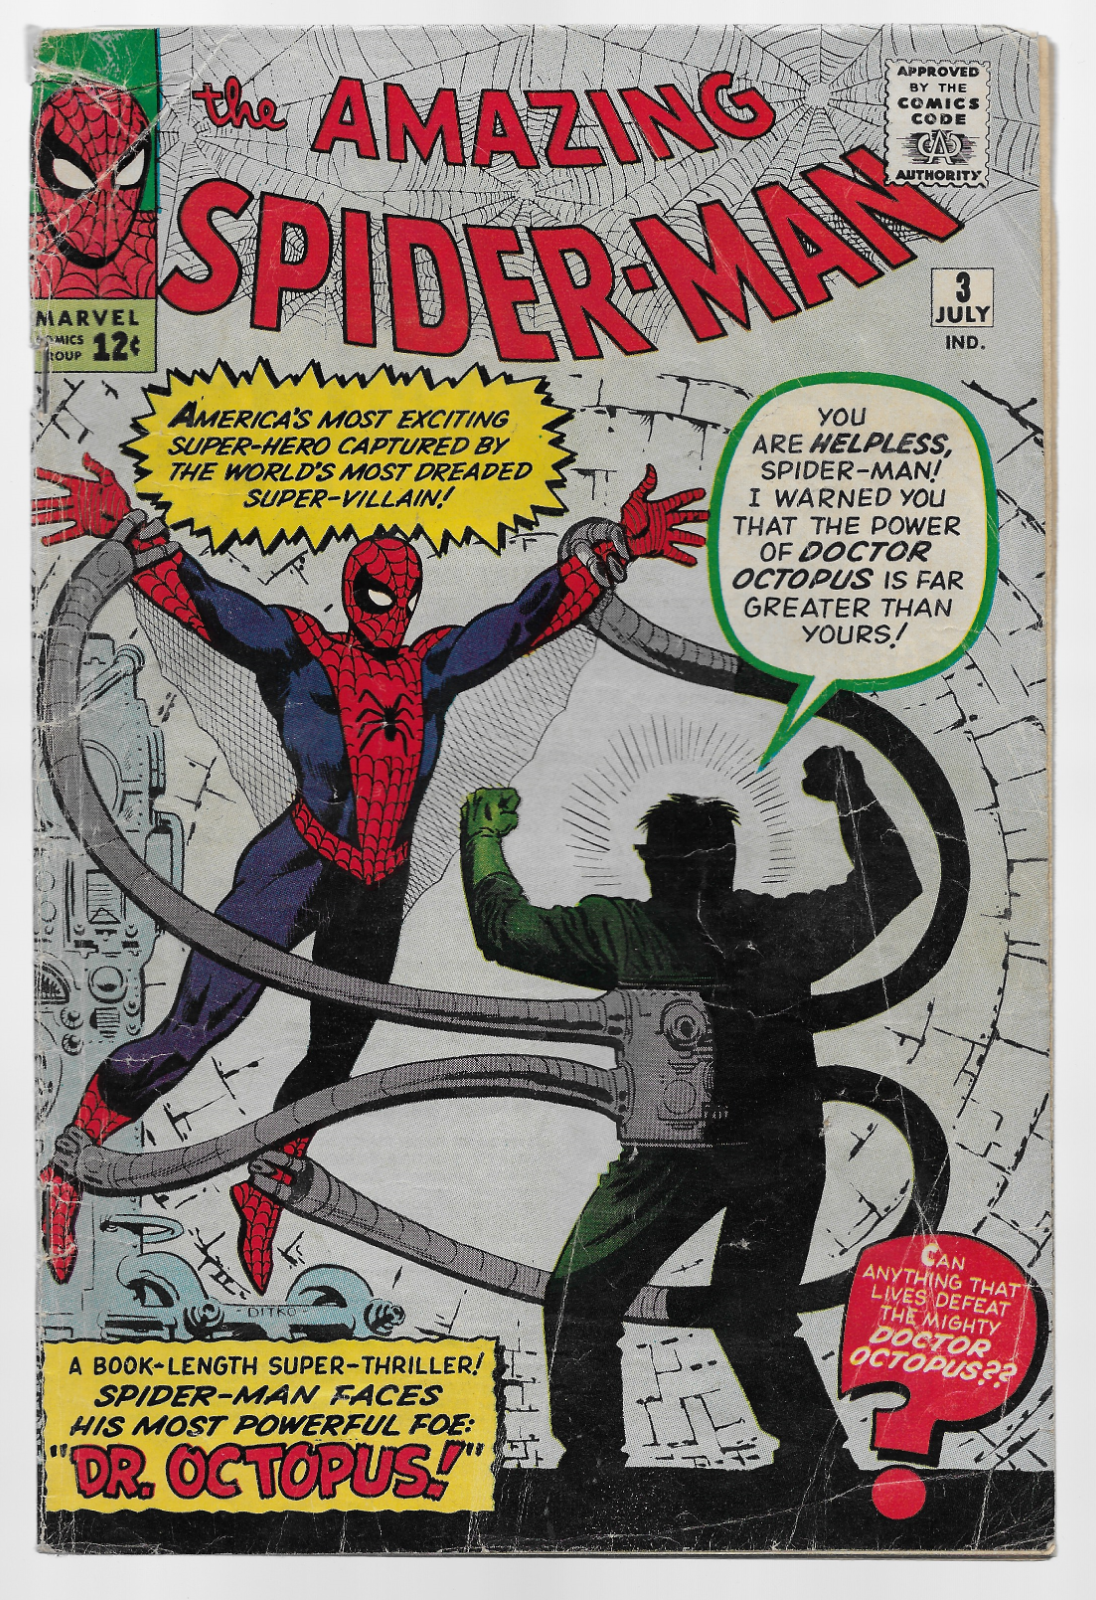 AMAZING SPIDERMAN 3 1963 First appearance and origin of Dr Octopus